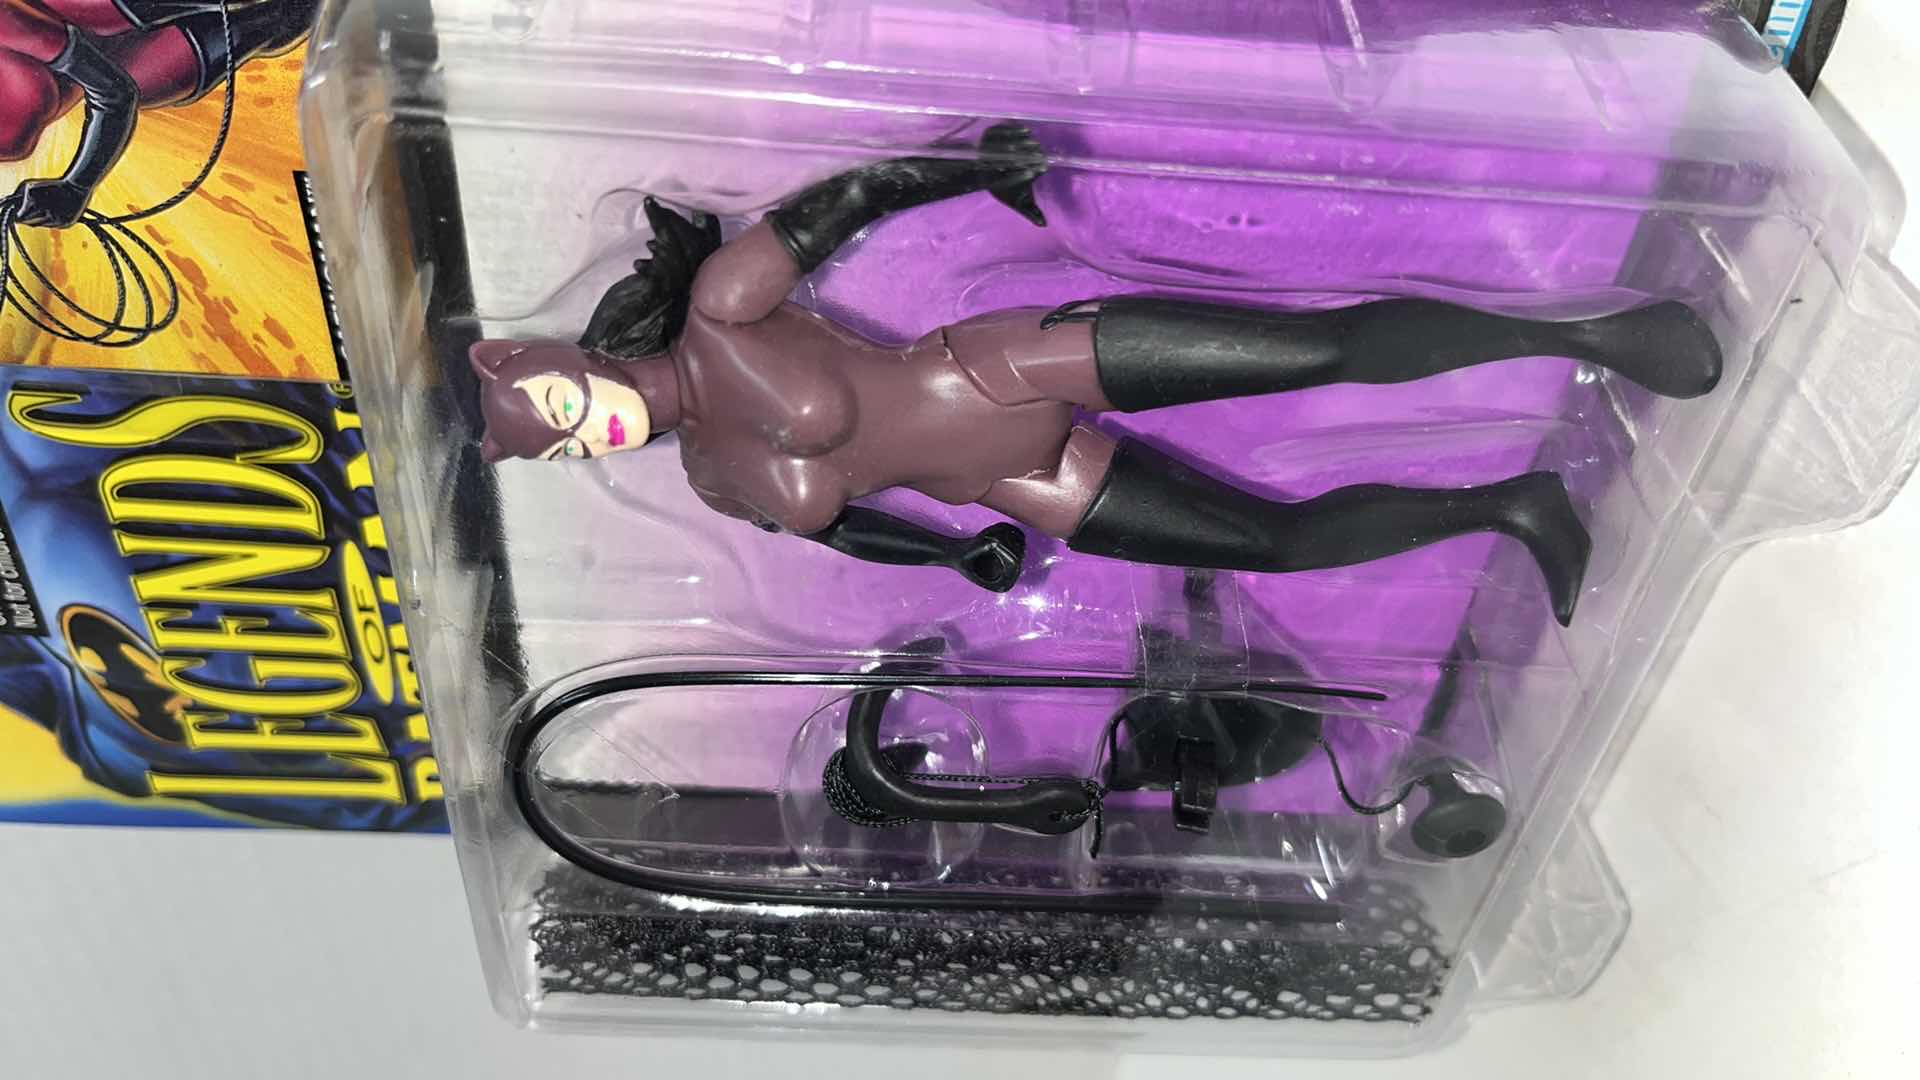 Photo 2 of NIP KENNER LEGENDS OF BATMAN ACTION FIGURE & ACCESSORIES, CATWOMAN W QUICK CLIMB CLAW/CAPTURE NET & COLLECTORS CARD (1)